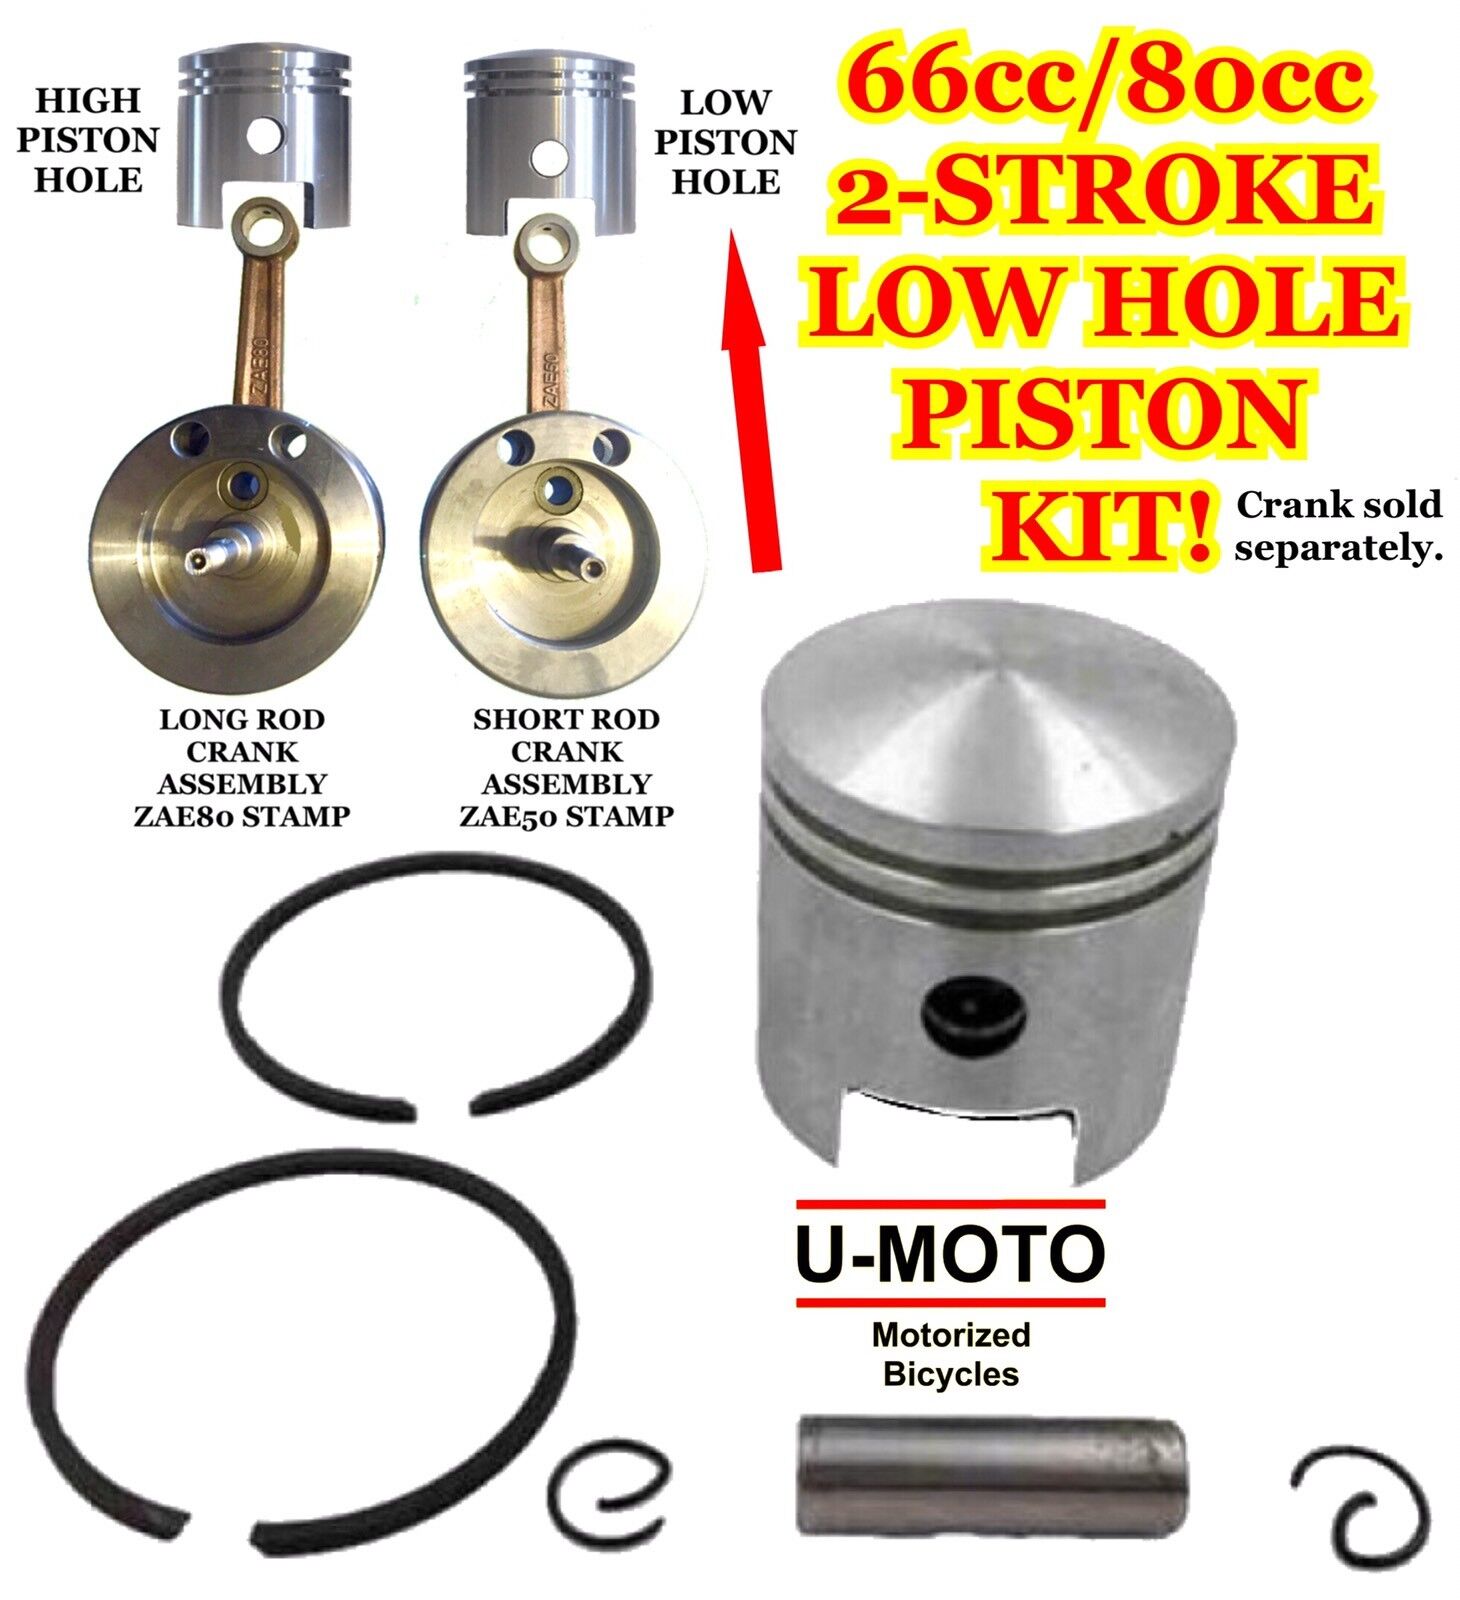 NEW DIY 2-STROKE 66cc/80cc MOTORIZED BICYCLE PISTON KIT FOR BICYCLES LOW HOLE